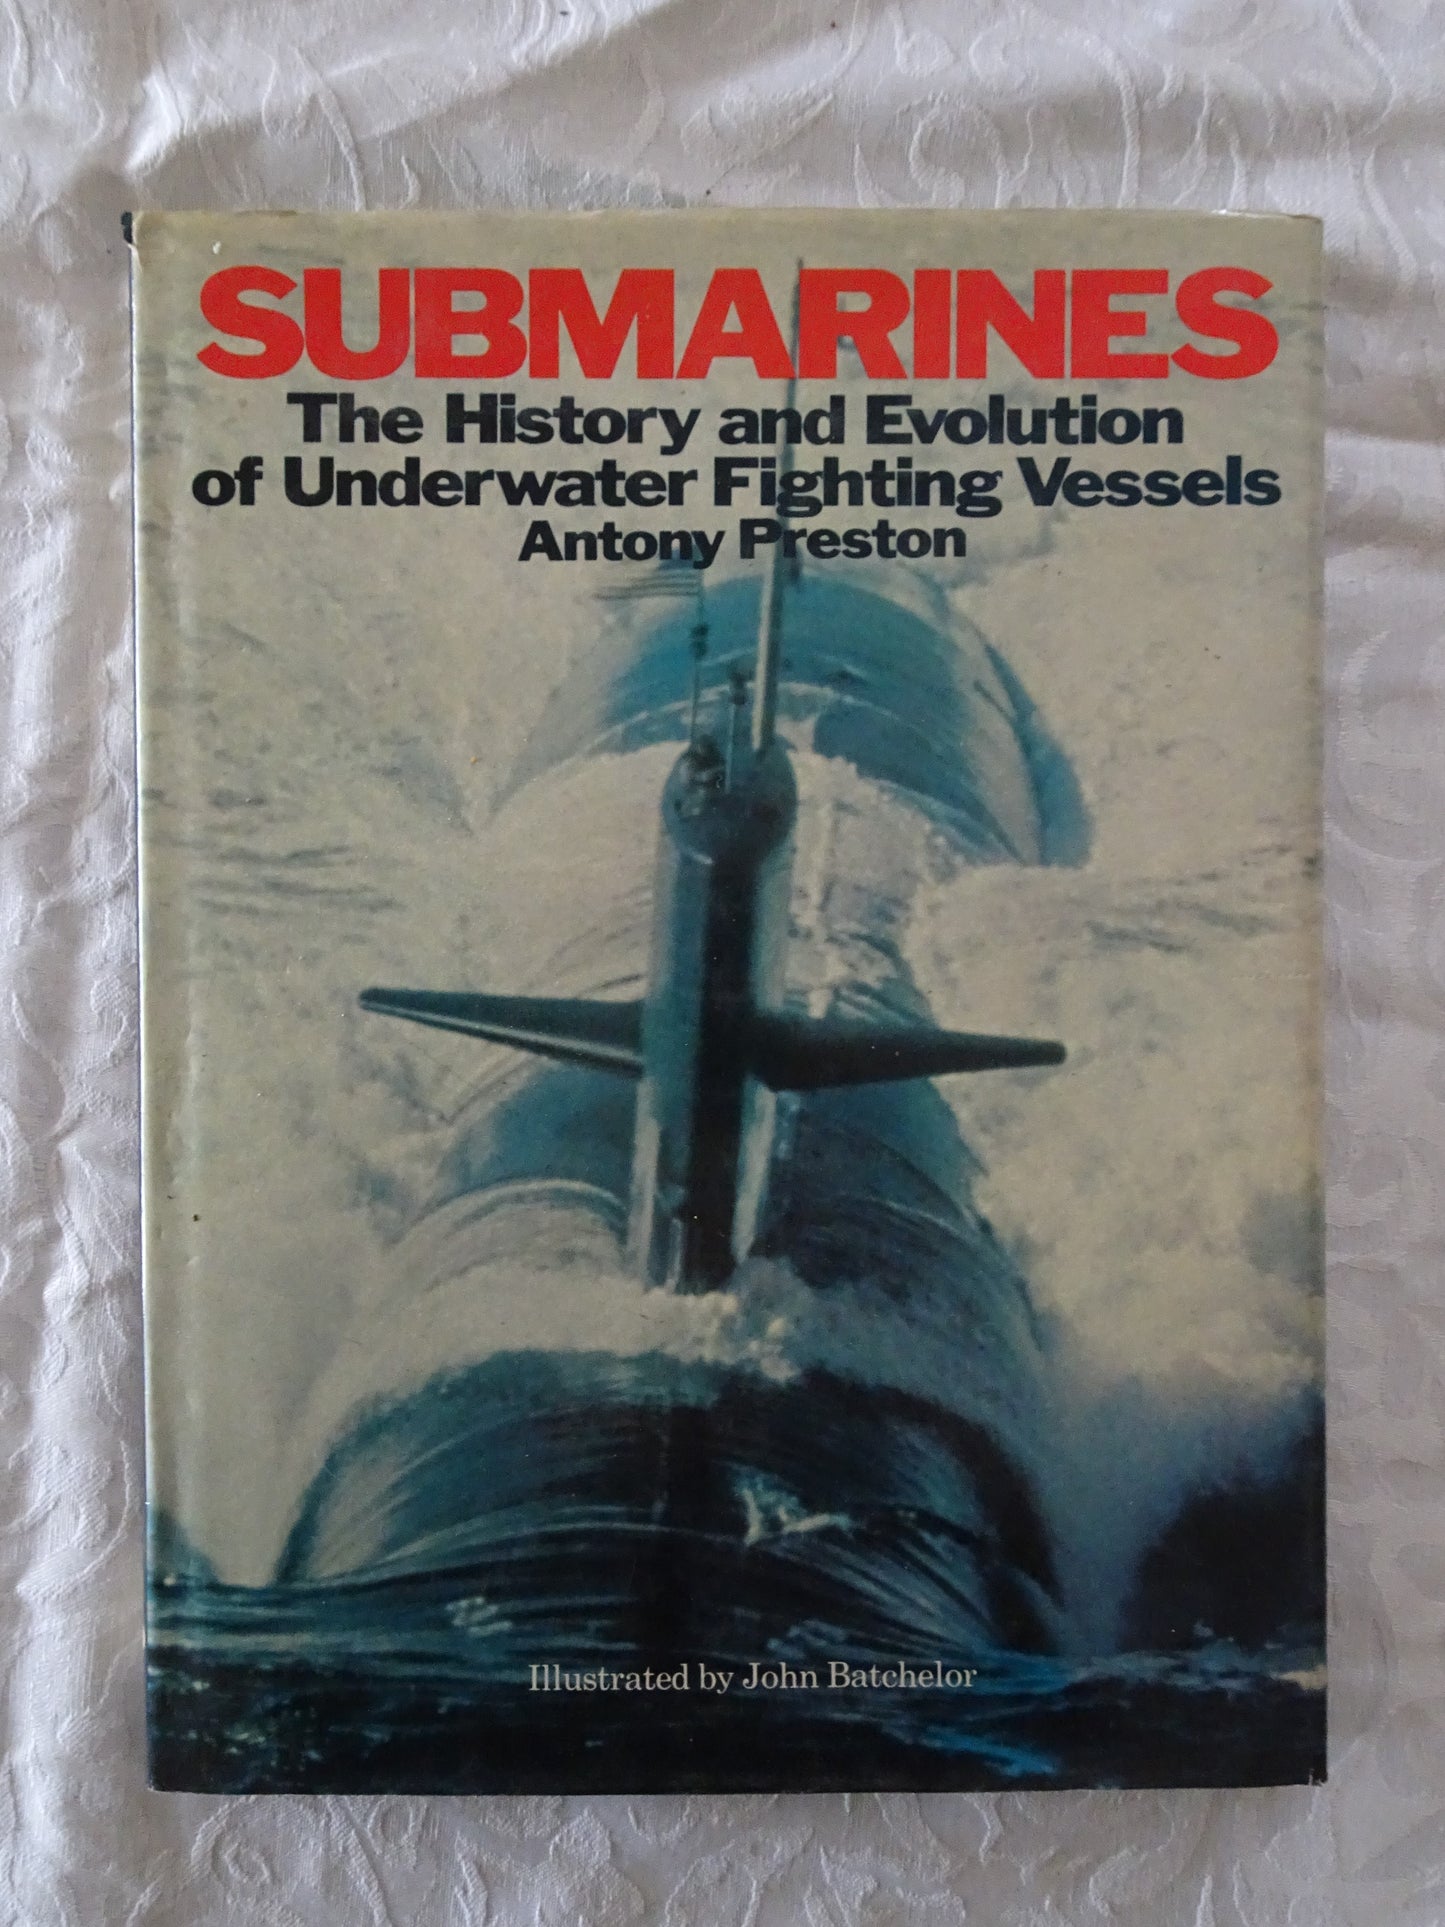 Submarines  The History and Evolution of Underwater Fighting Vessels  by Antony Preston, illustrated by John Batchelor